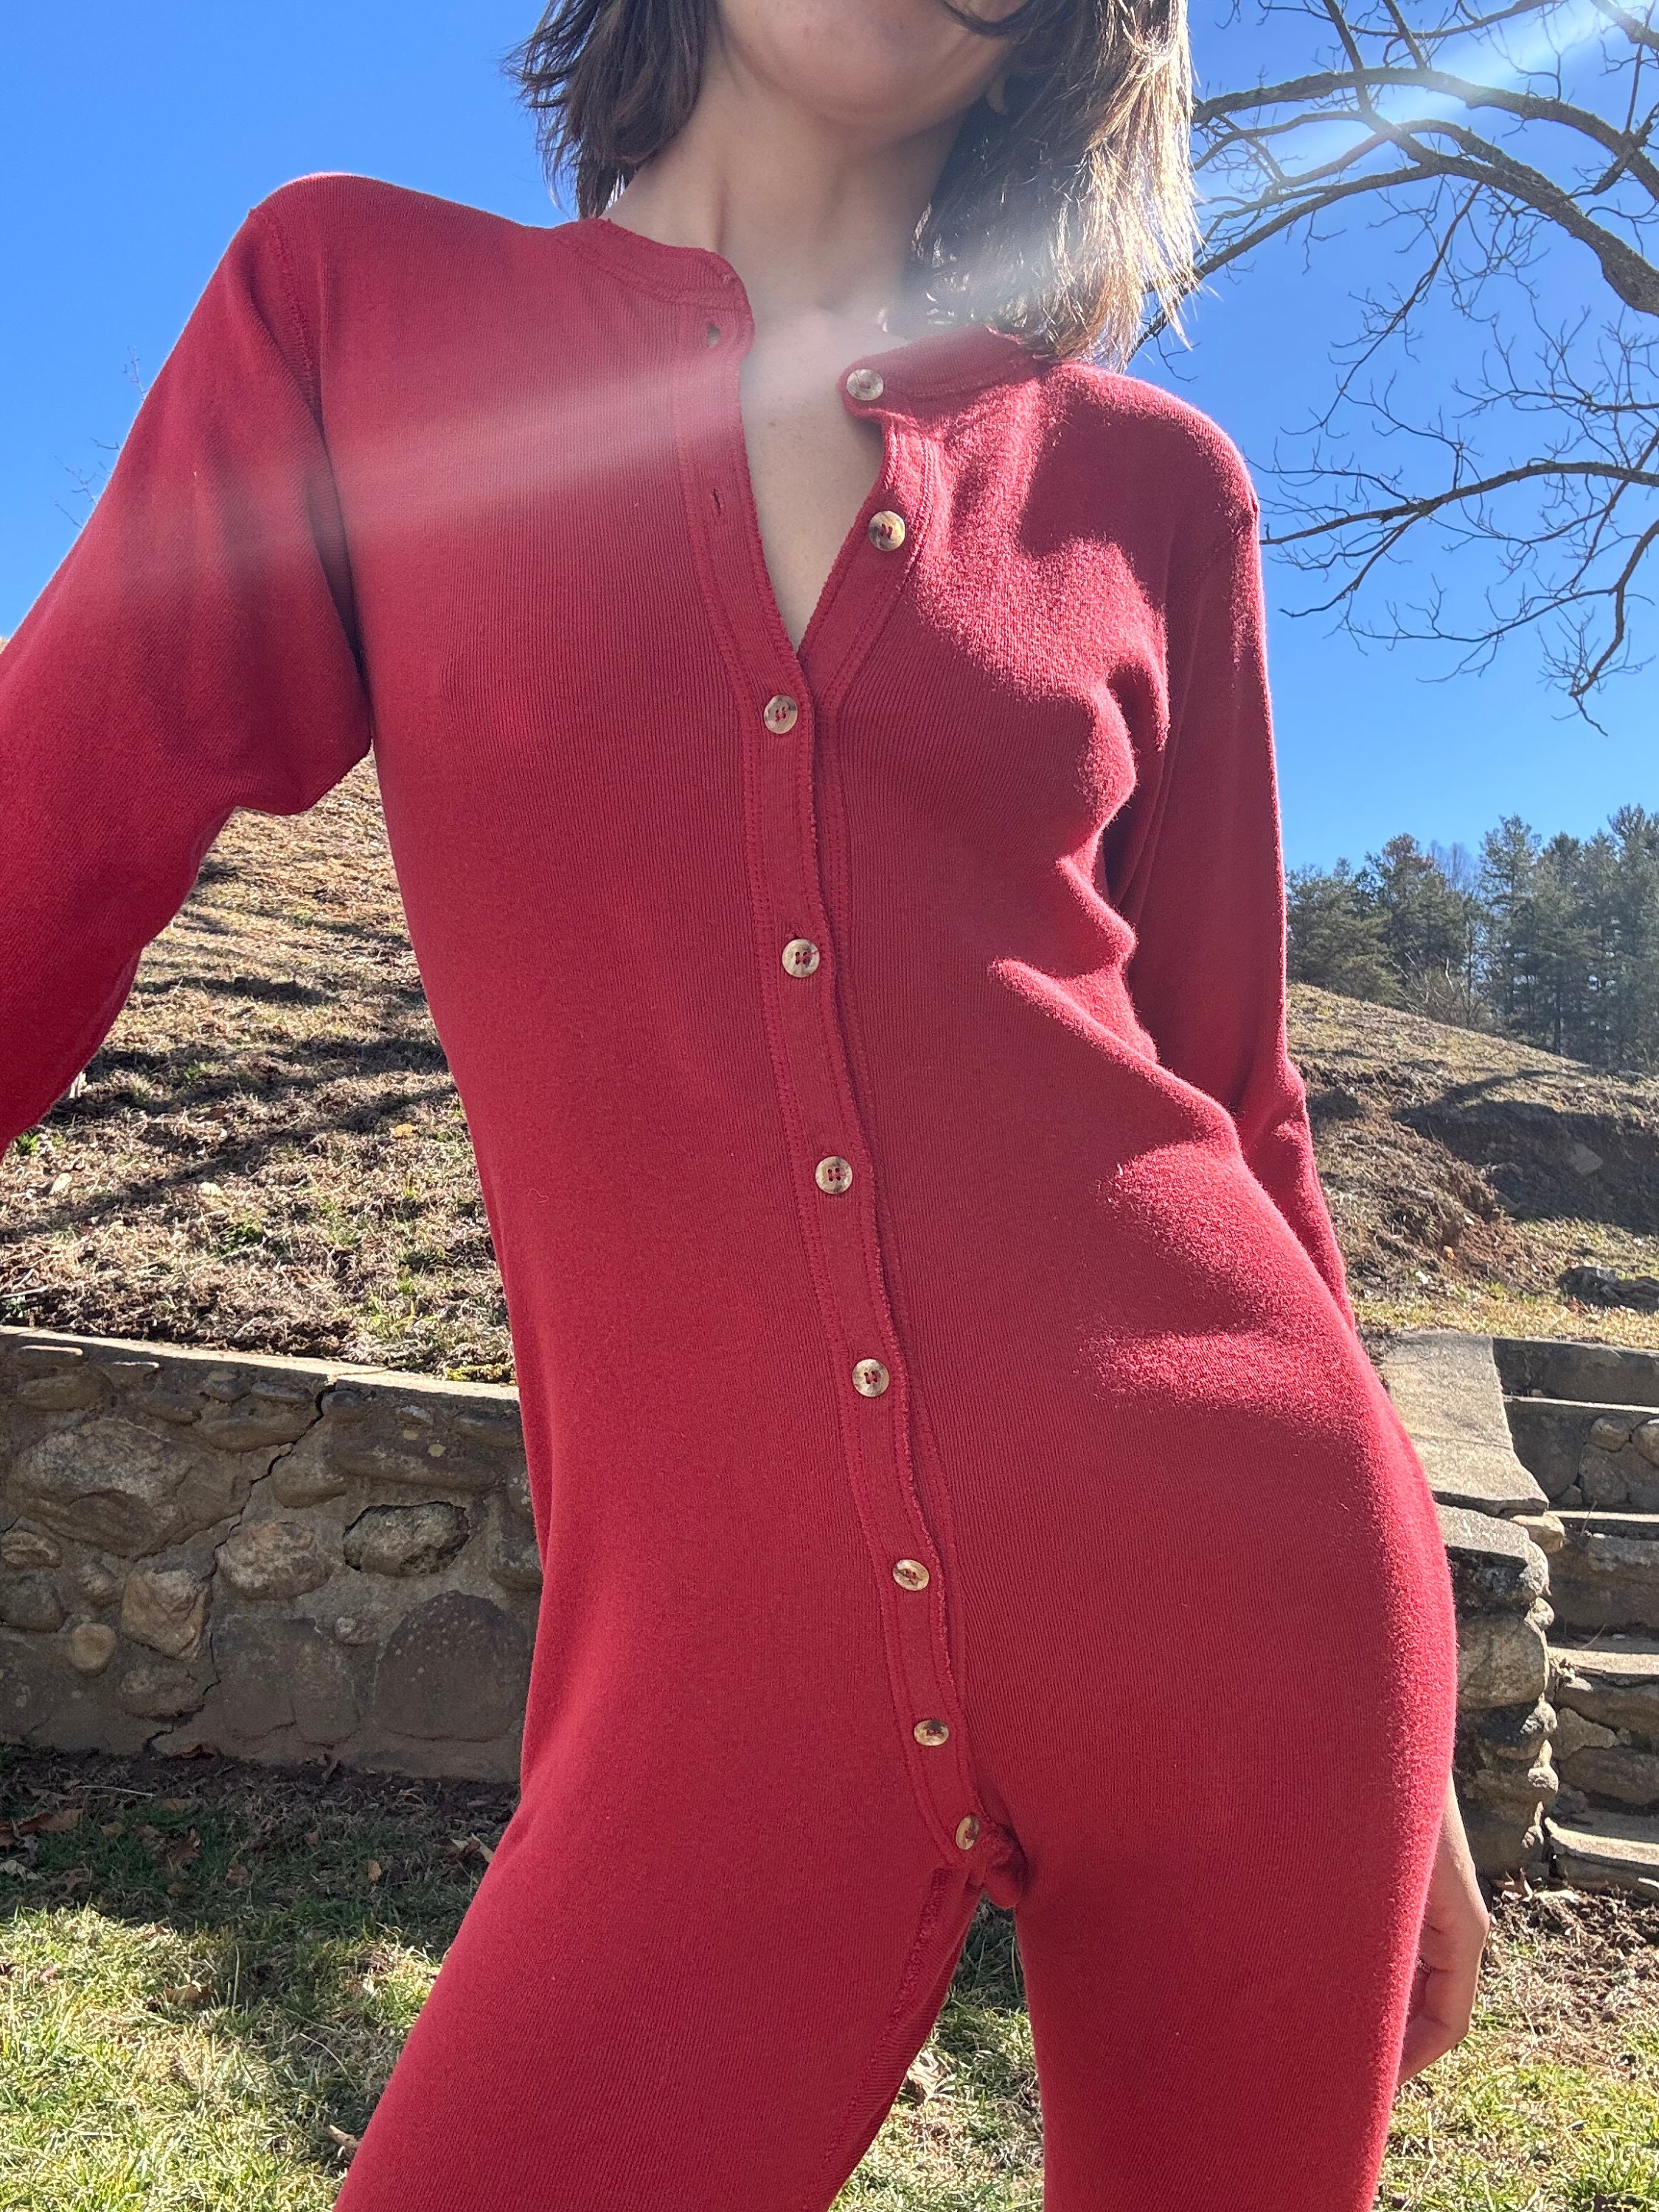 Vintage Red Union Suit, Waffle Weave Long Johns Thermal Underwear